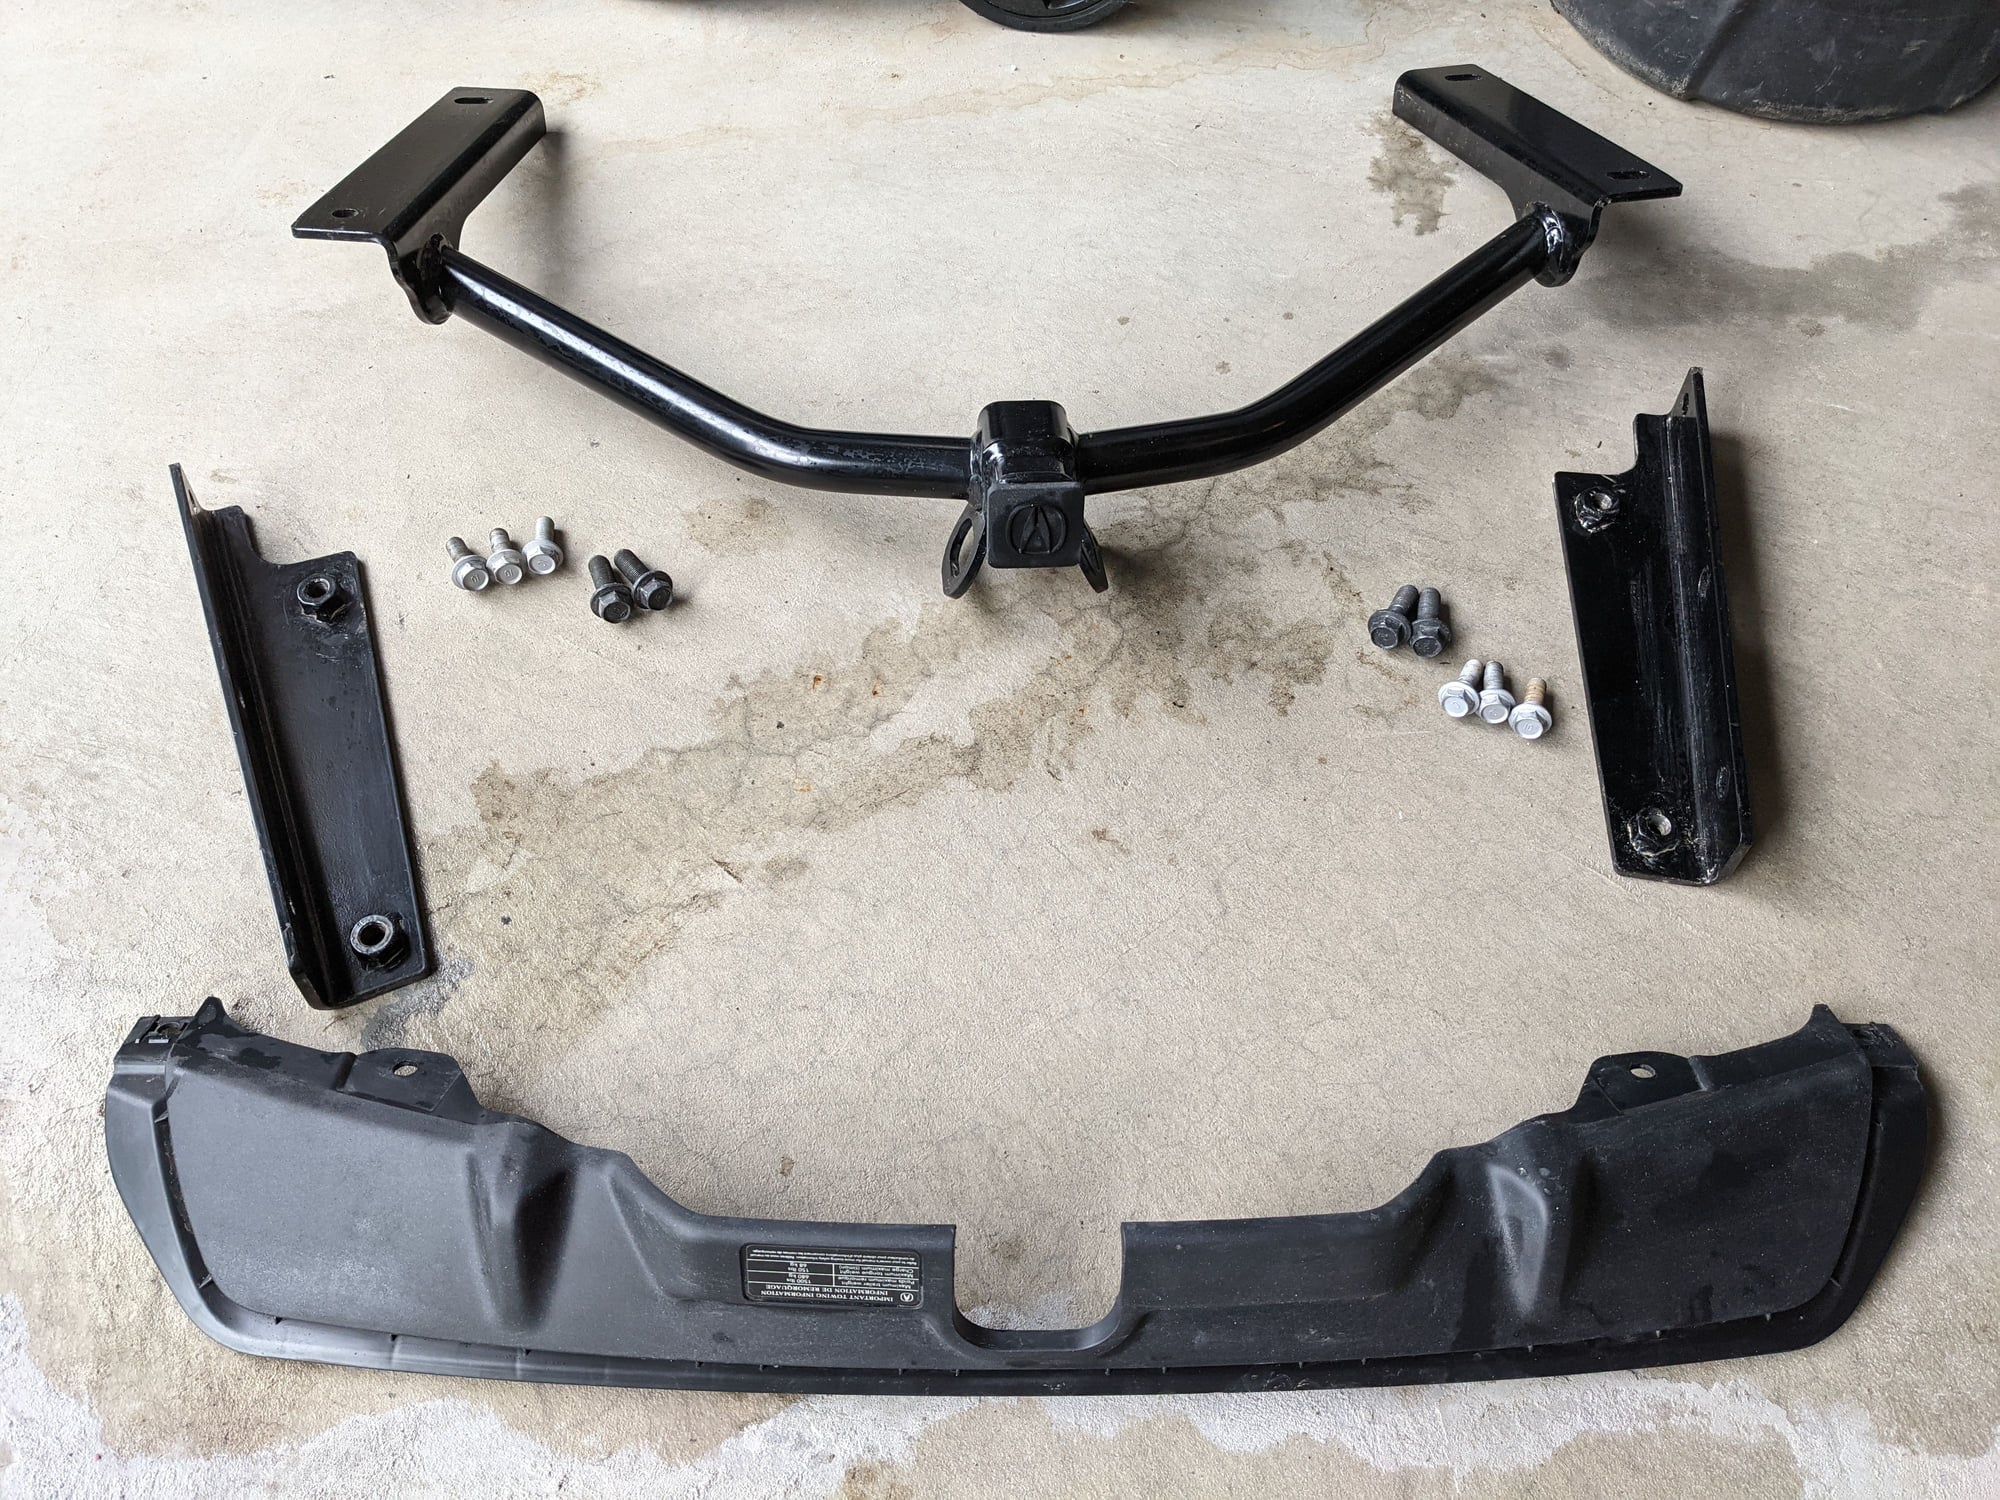 Exterior Body Parts - FS: 2019-2021 Acura RDX Towing Hitch with Trim Cover (OEM) - Used - 2019 to 2021 Acura RDX - Kitchener, ON N2R0A7, Canada